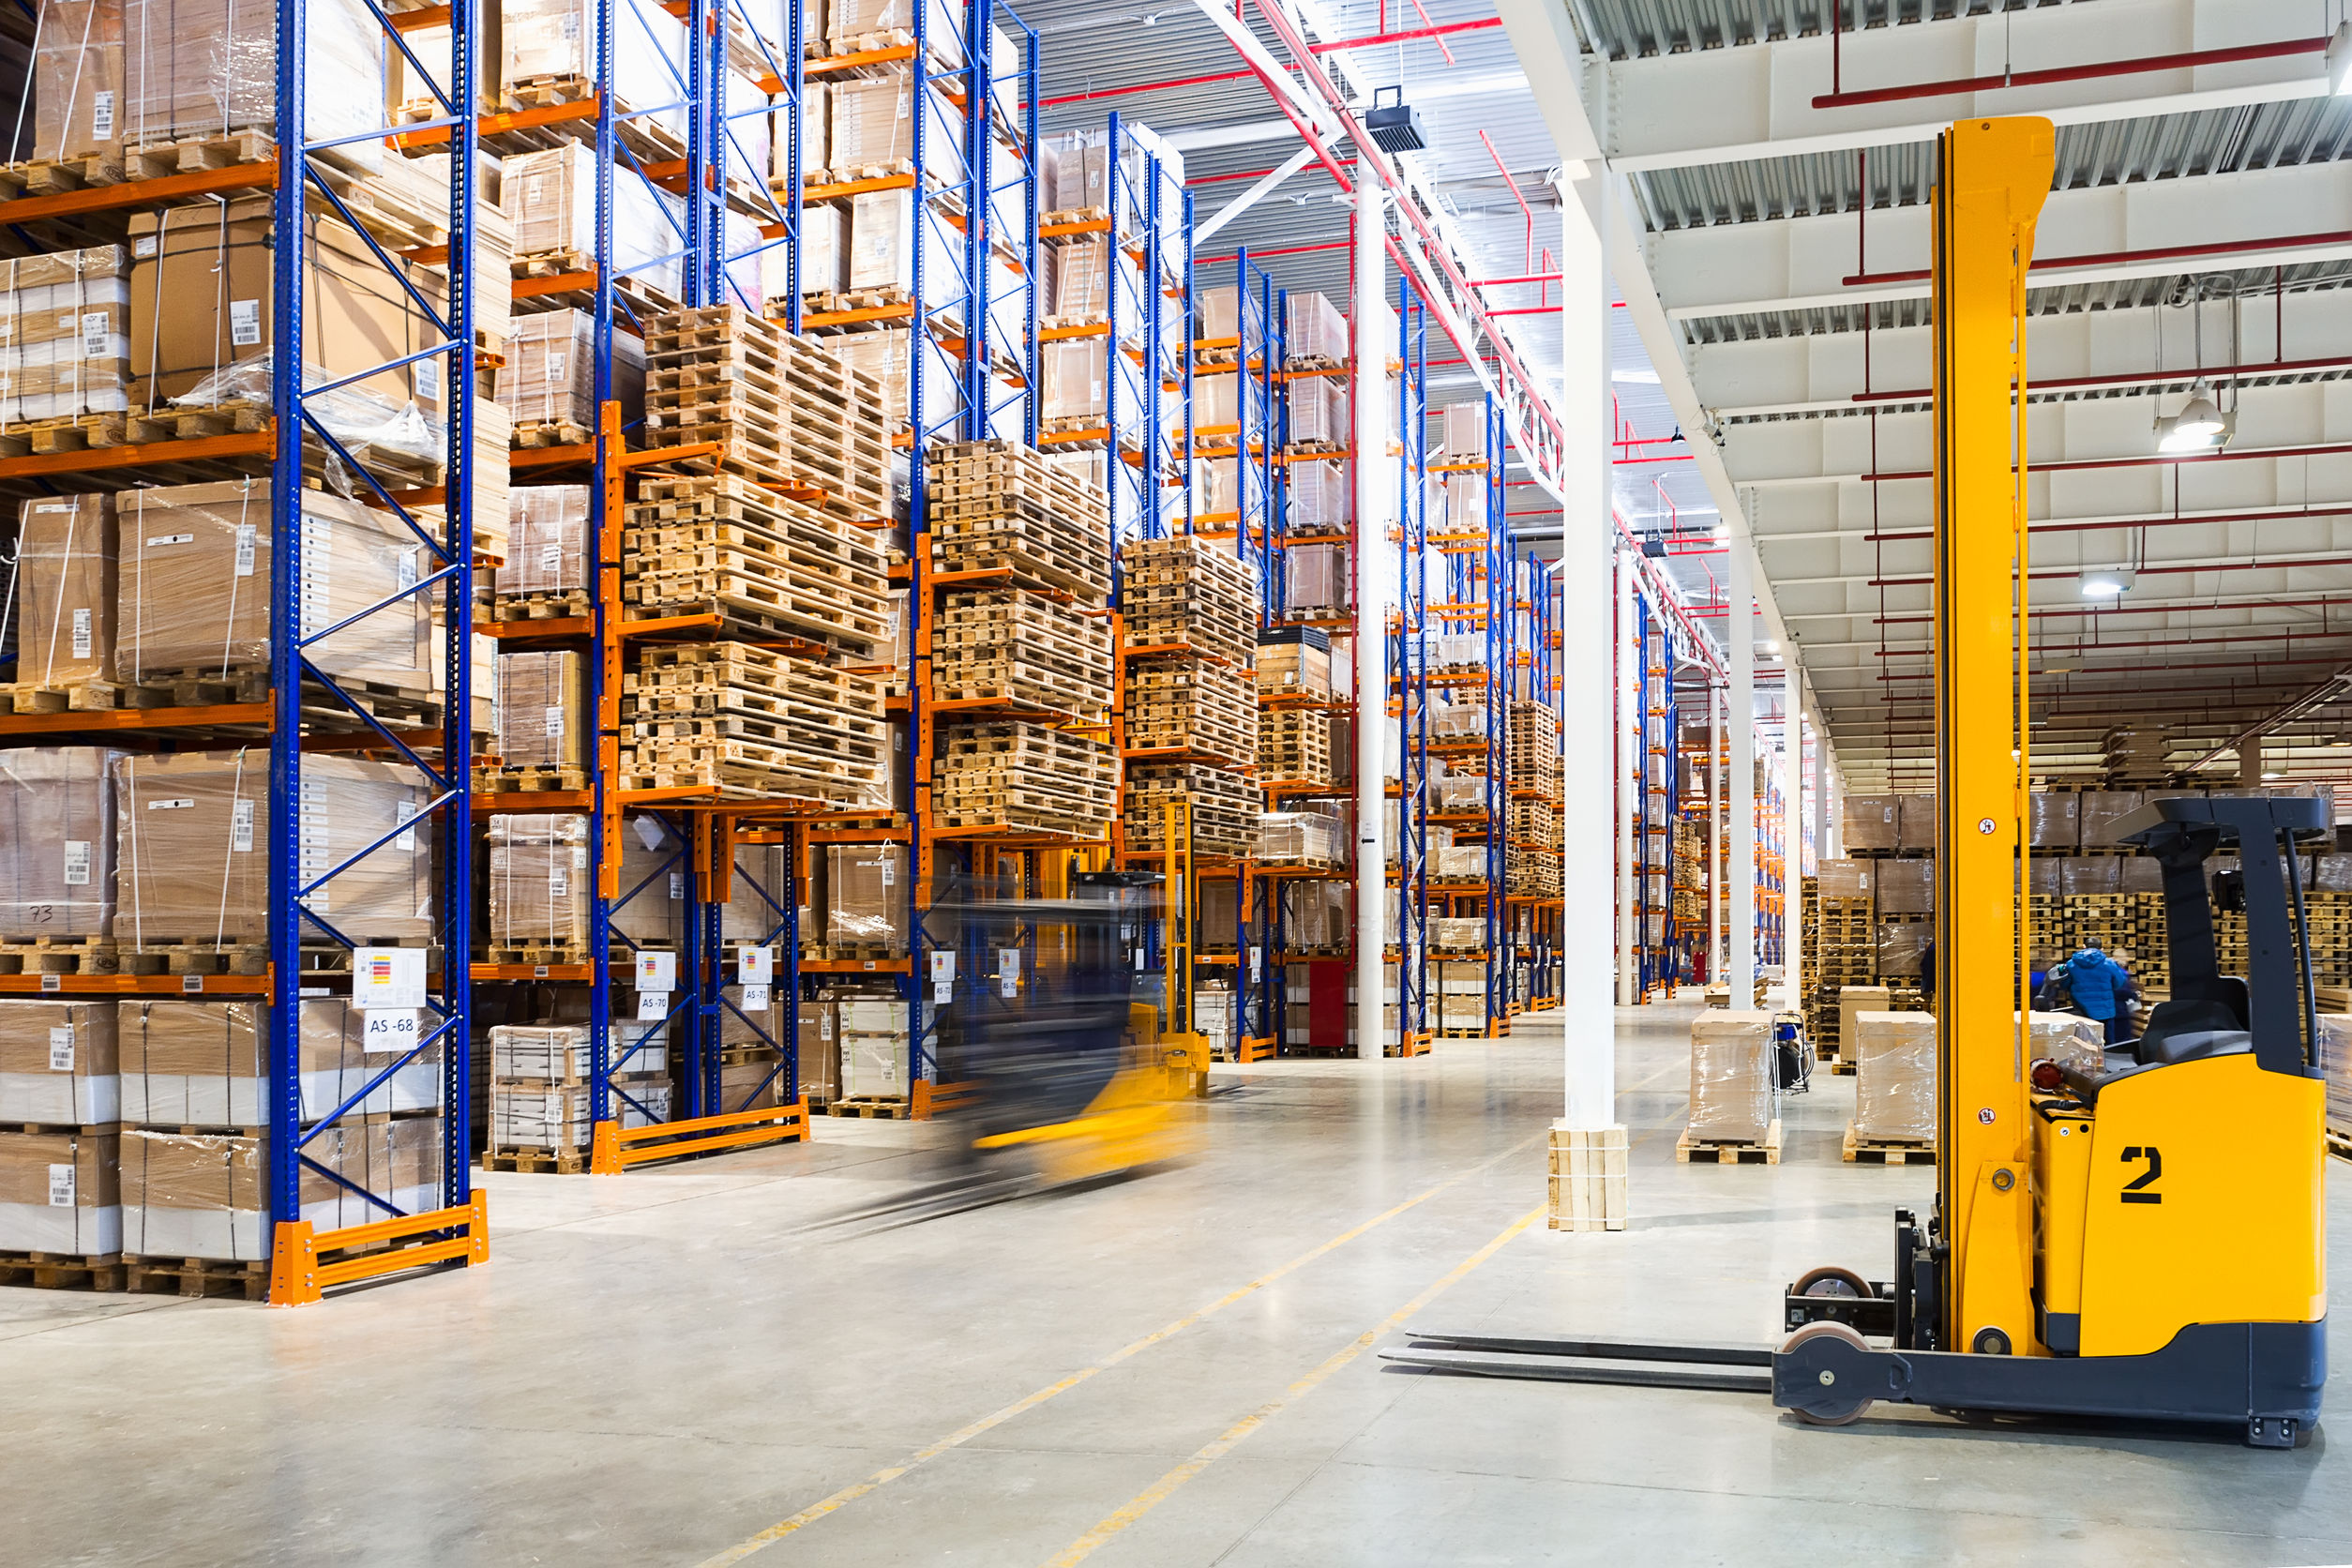 5 Top Warehousing and Fulfillment Tips